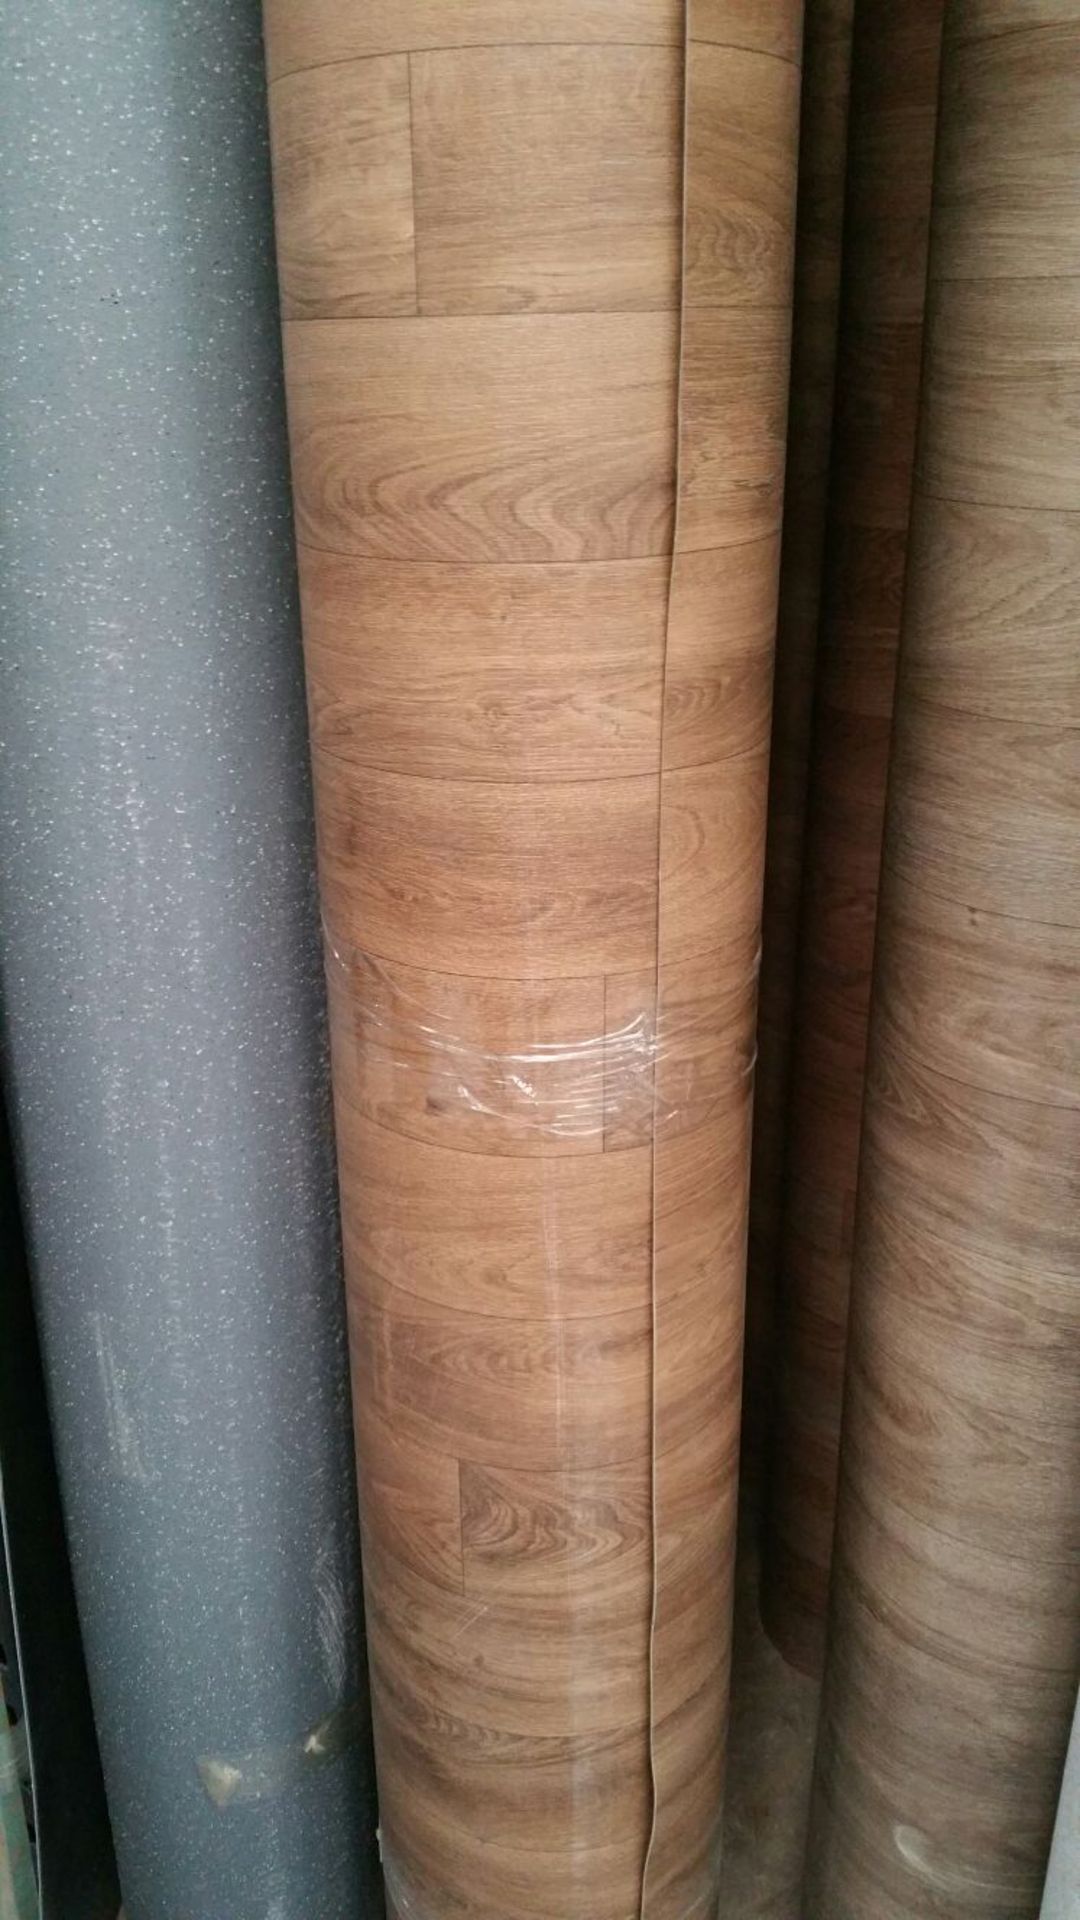 24x2m Roll heavy duty safety flooring Colour natural oak total 48m2 24x2m total coverage 48sqm